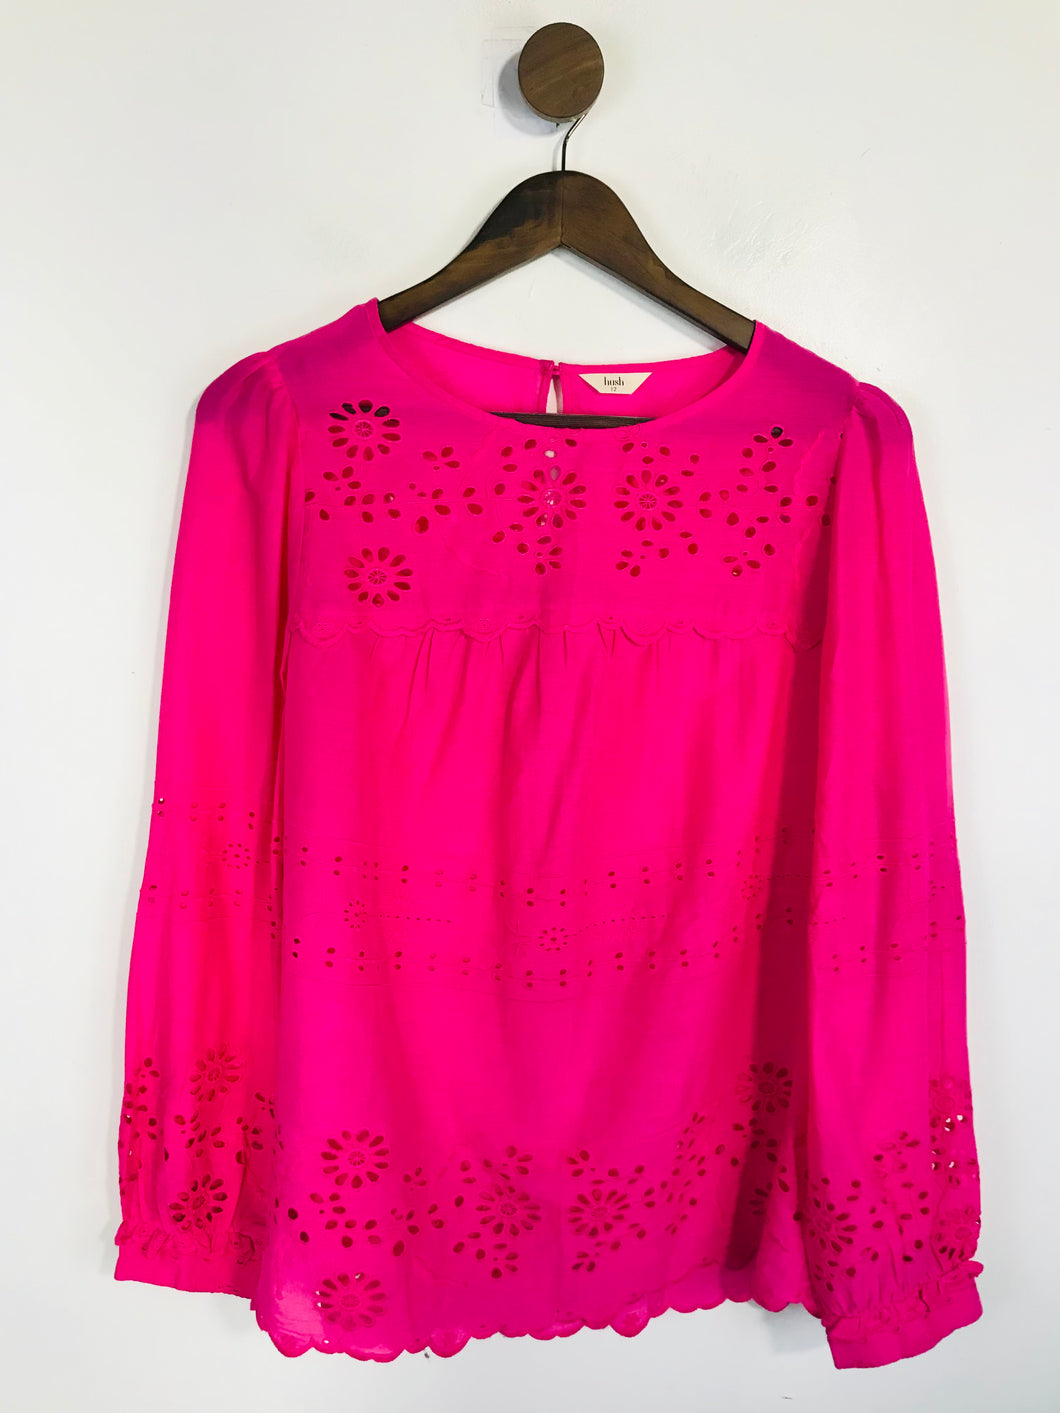 Hush Women's Embroidered Blouse | UK12 | Pink